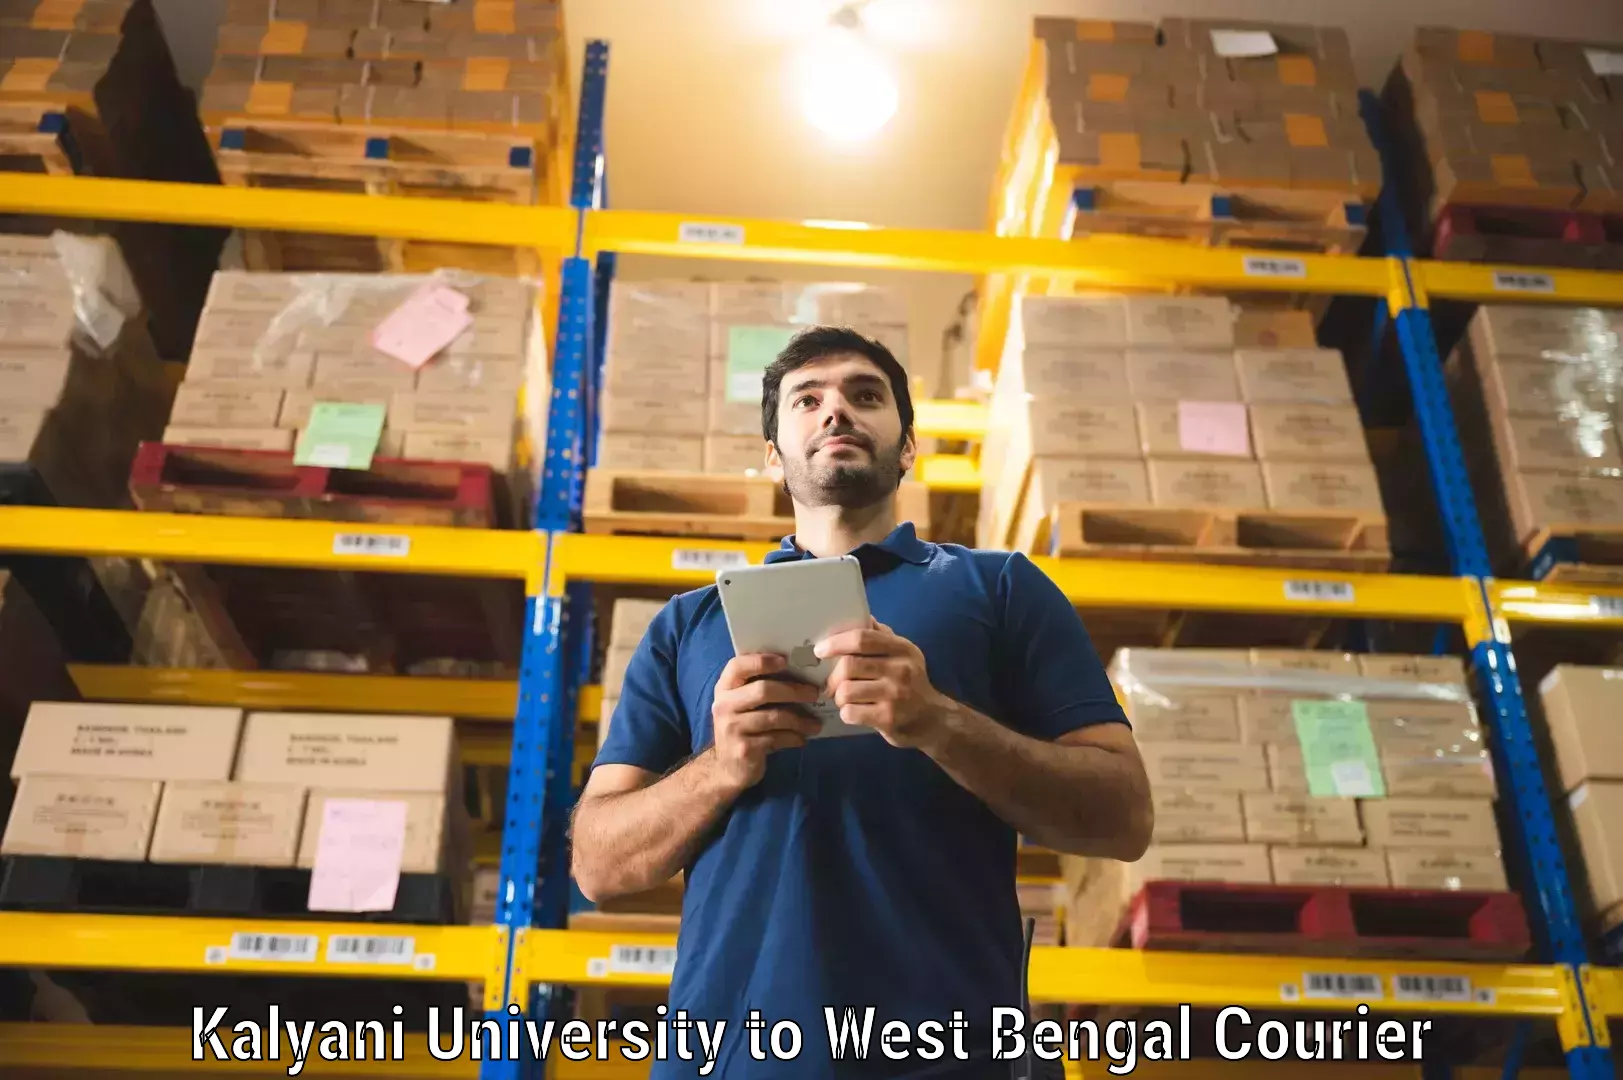 Efficient freight service in Kalyani University to West Bengal